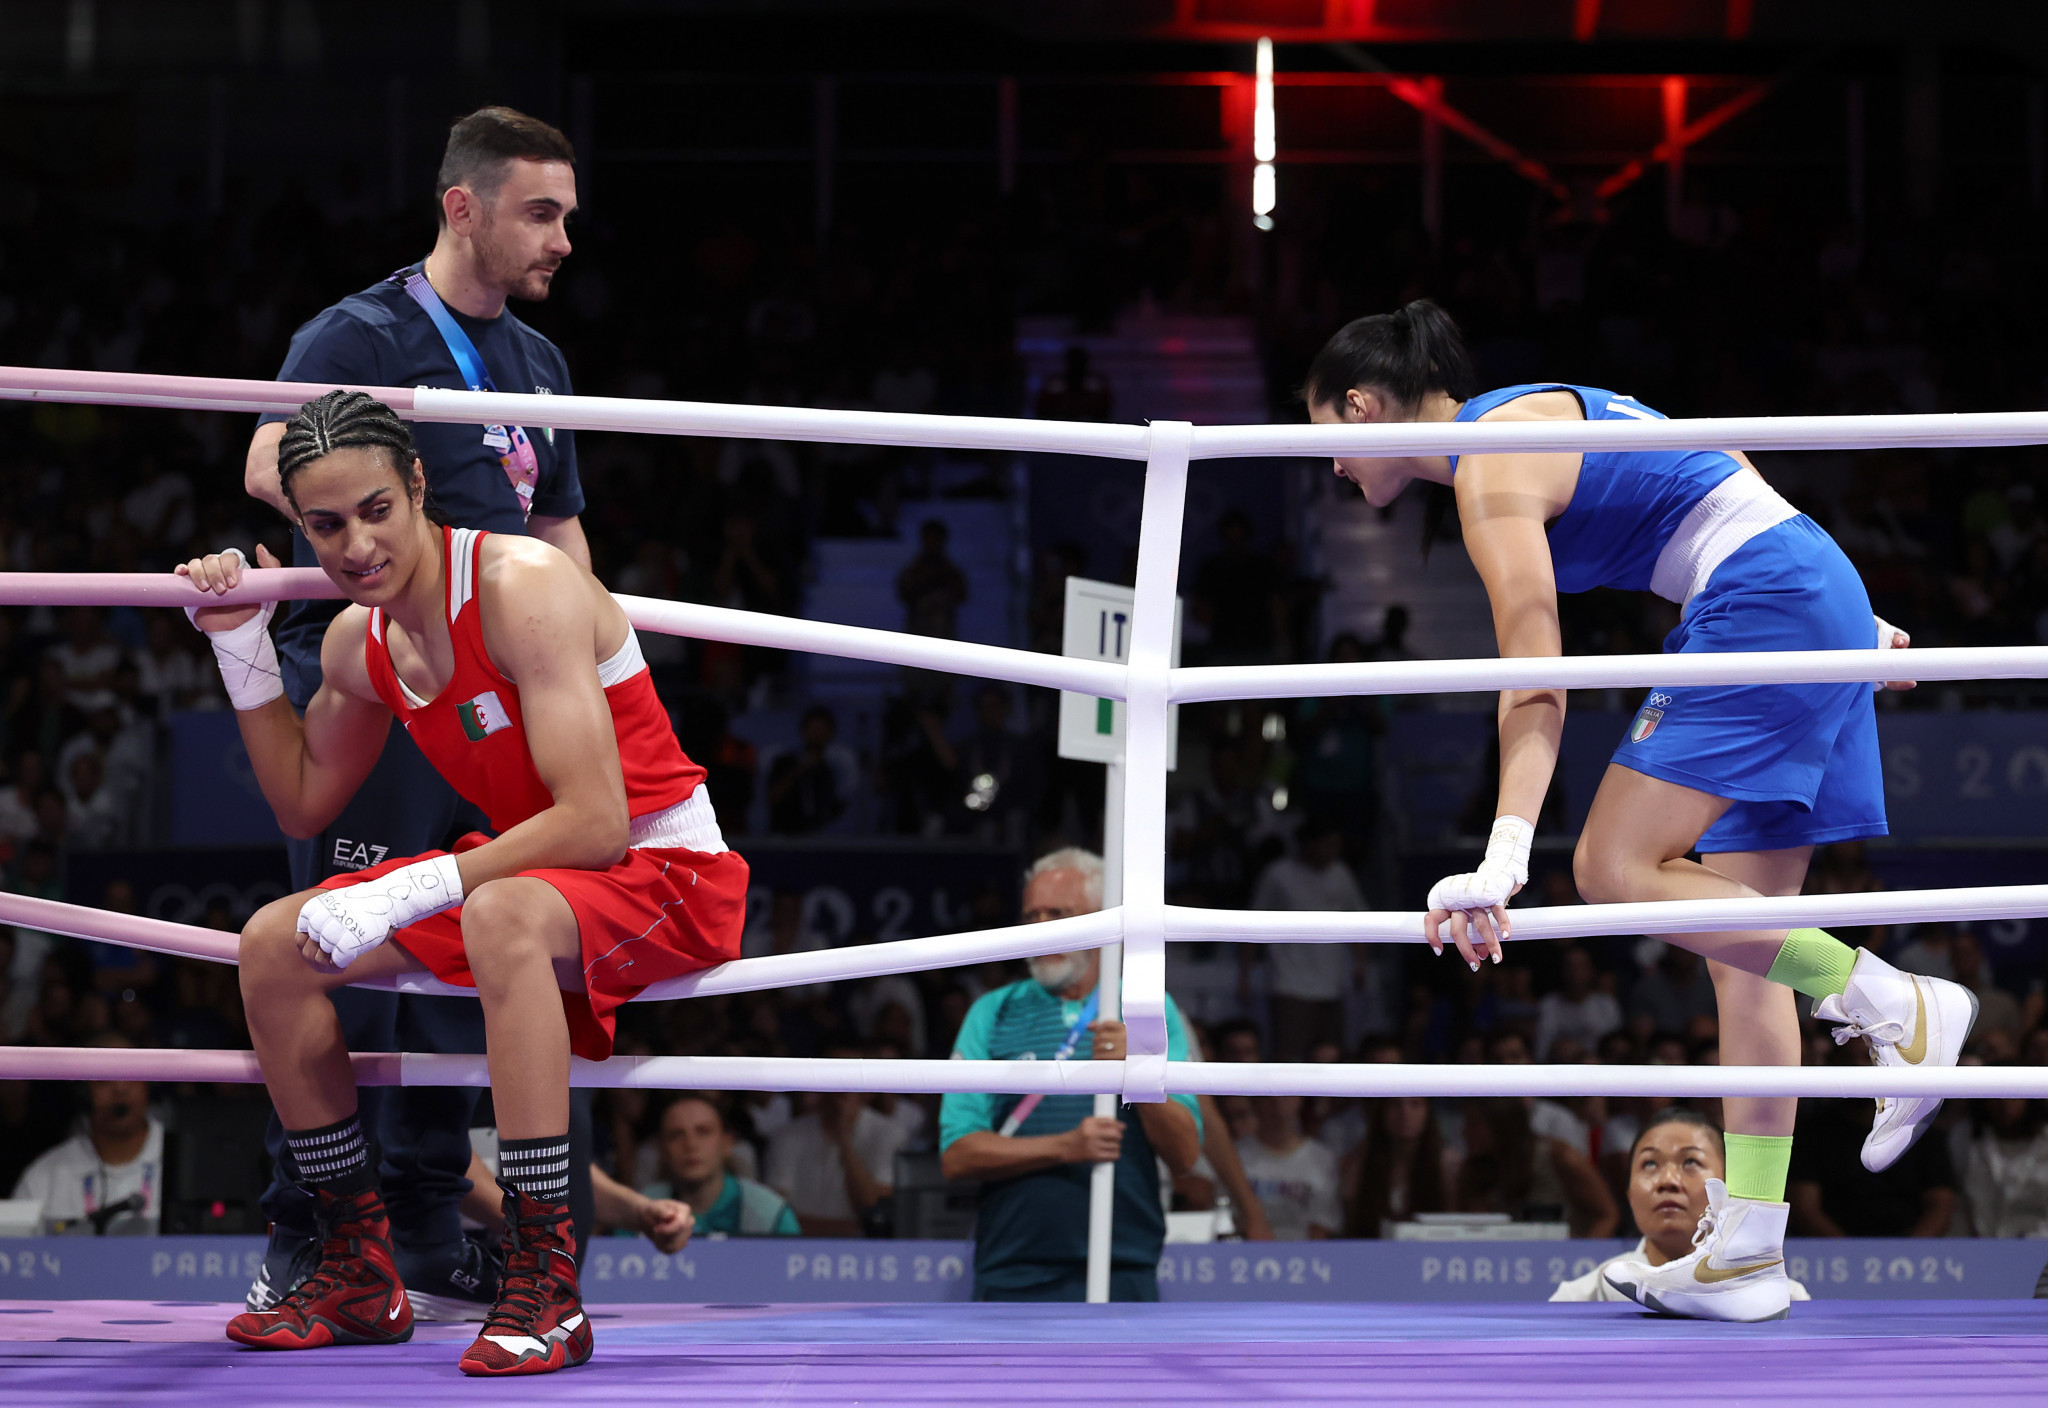 Imane Khelif and Angela Carini in the Paris 2024 ring. GETTY IMAGES